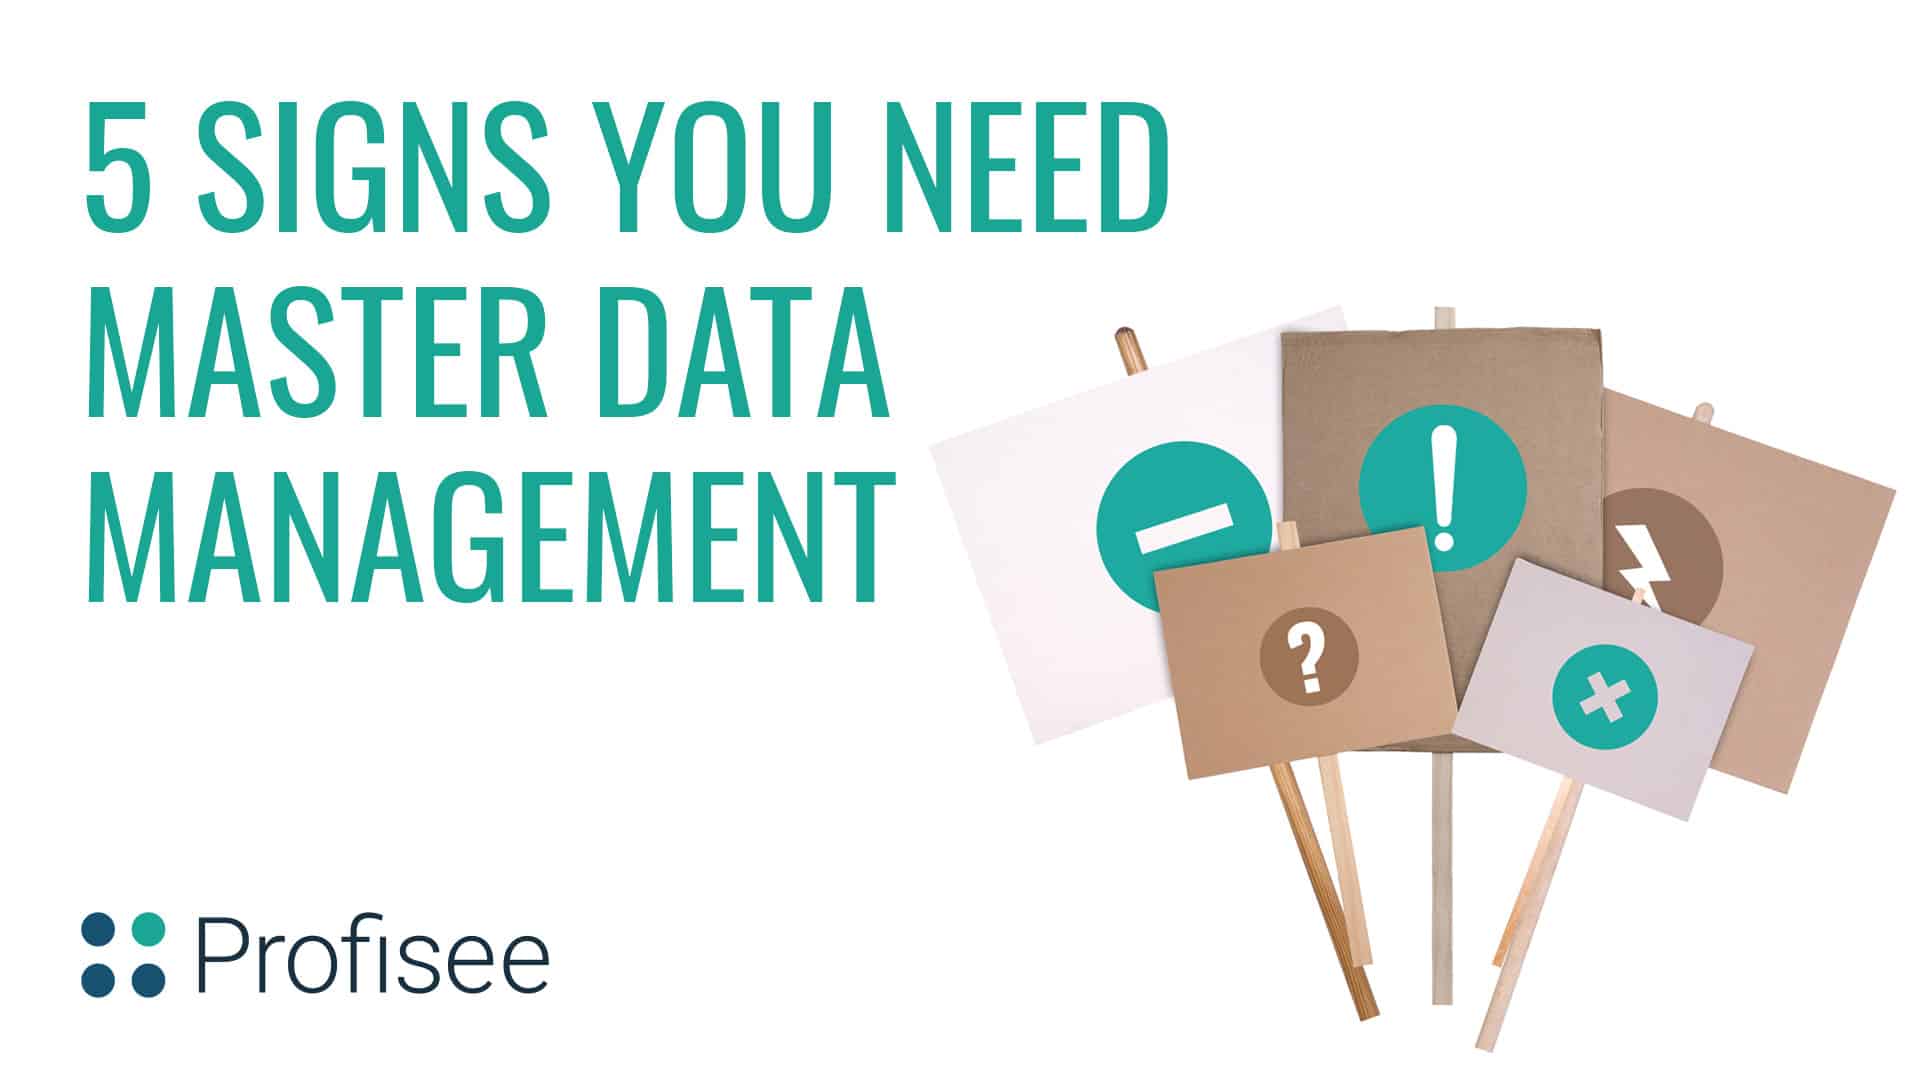 5 Signs you Need Master Data Management